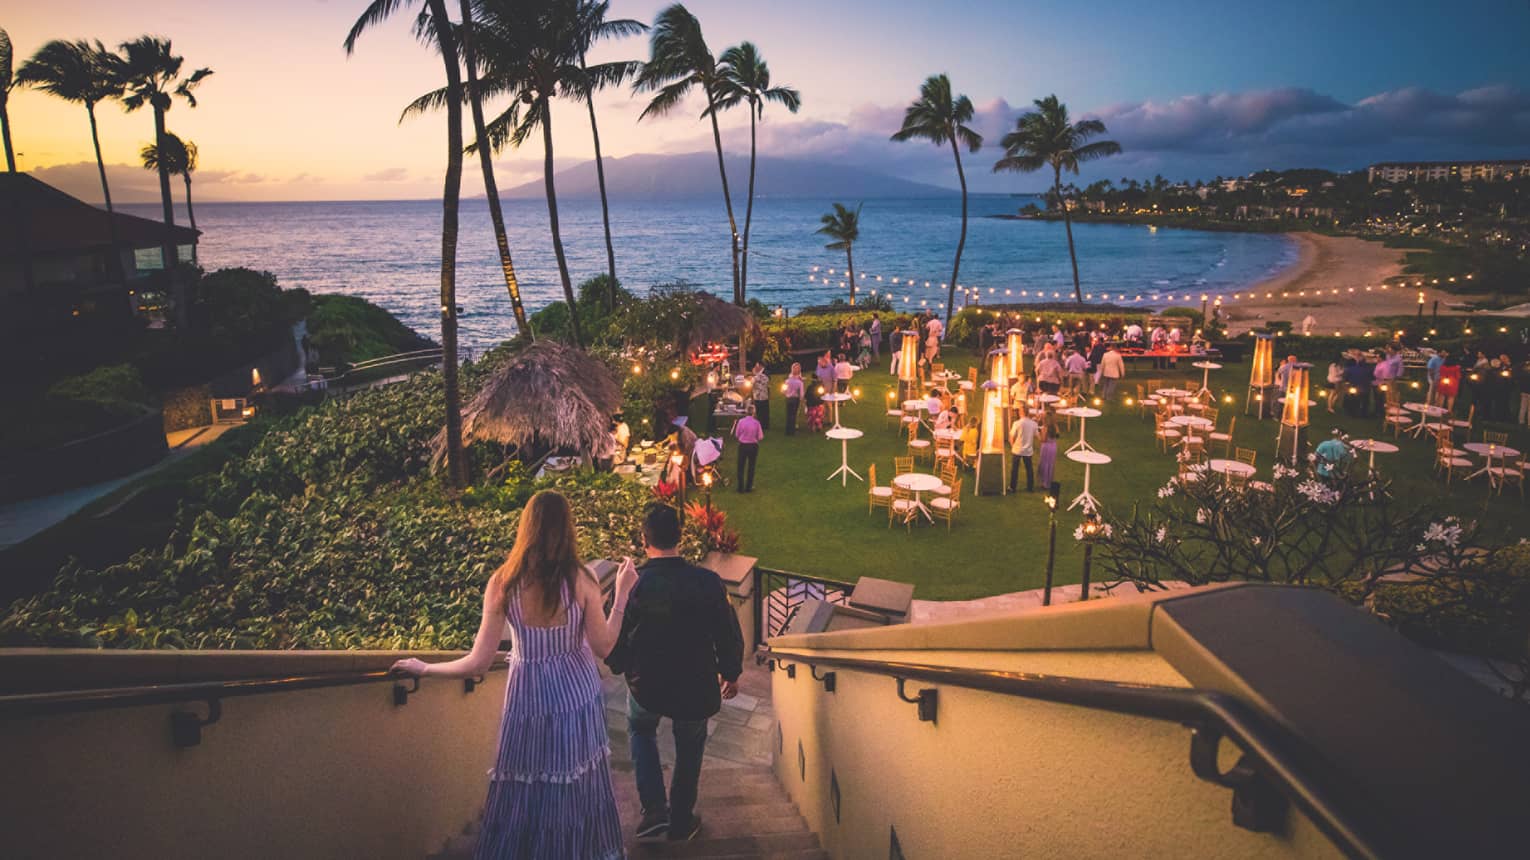 Couple walk down stairs towards grass with tables, lantern, surrounded by palm trees and ocean at dusk